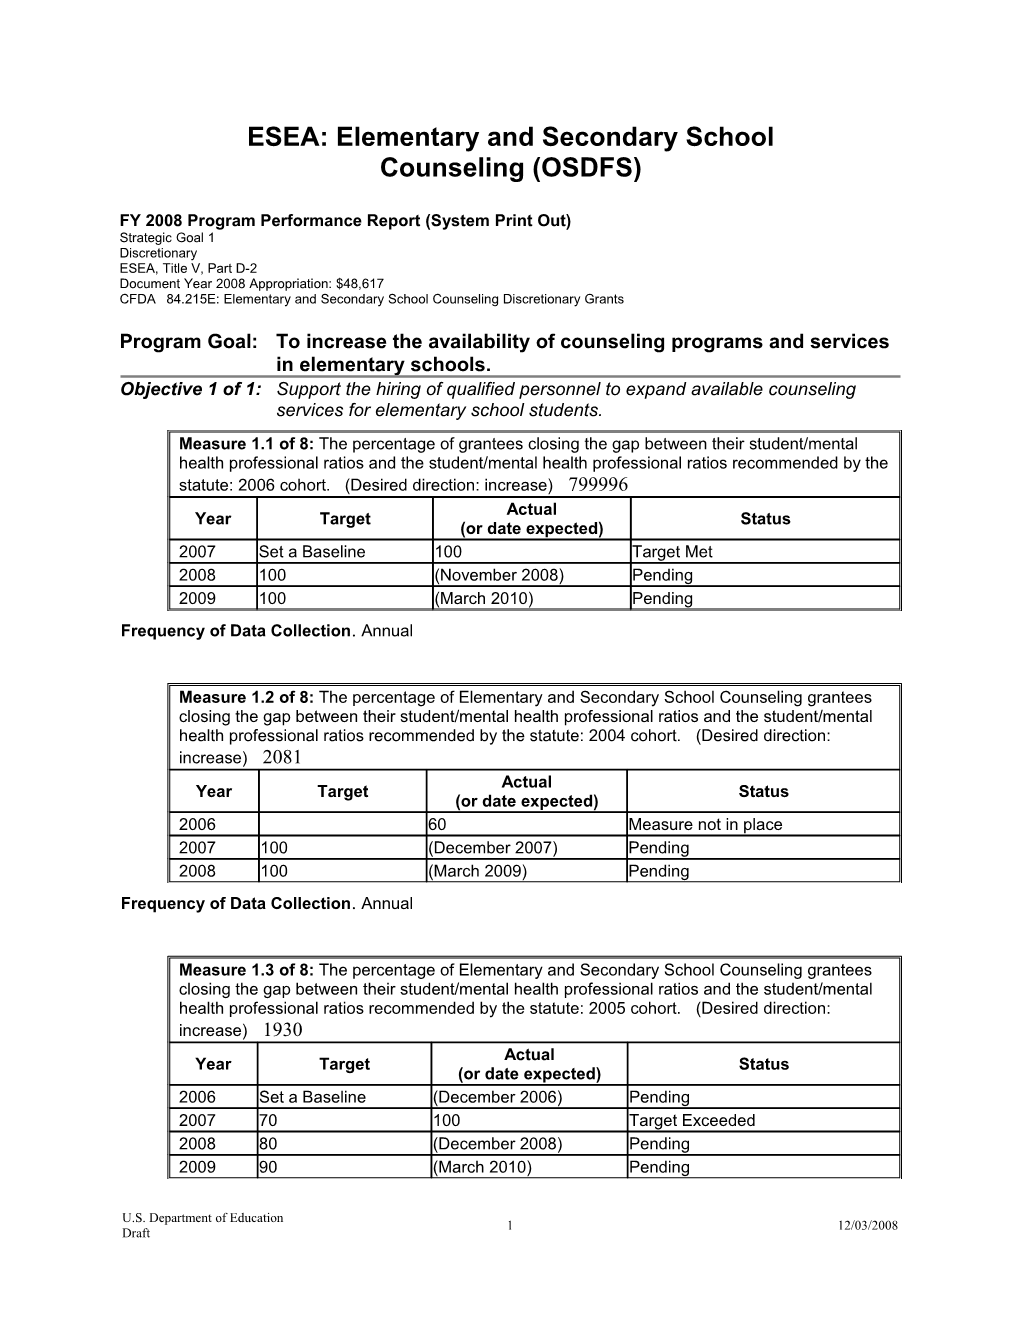 OSDFS ESEA: Elementary and Secondary School Counseling (MS Word)